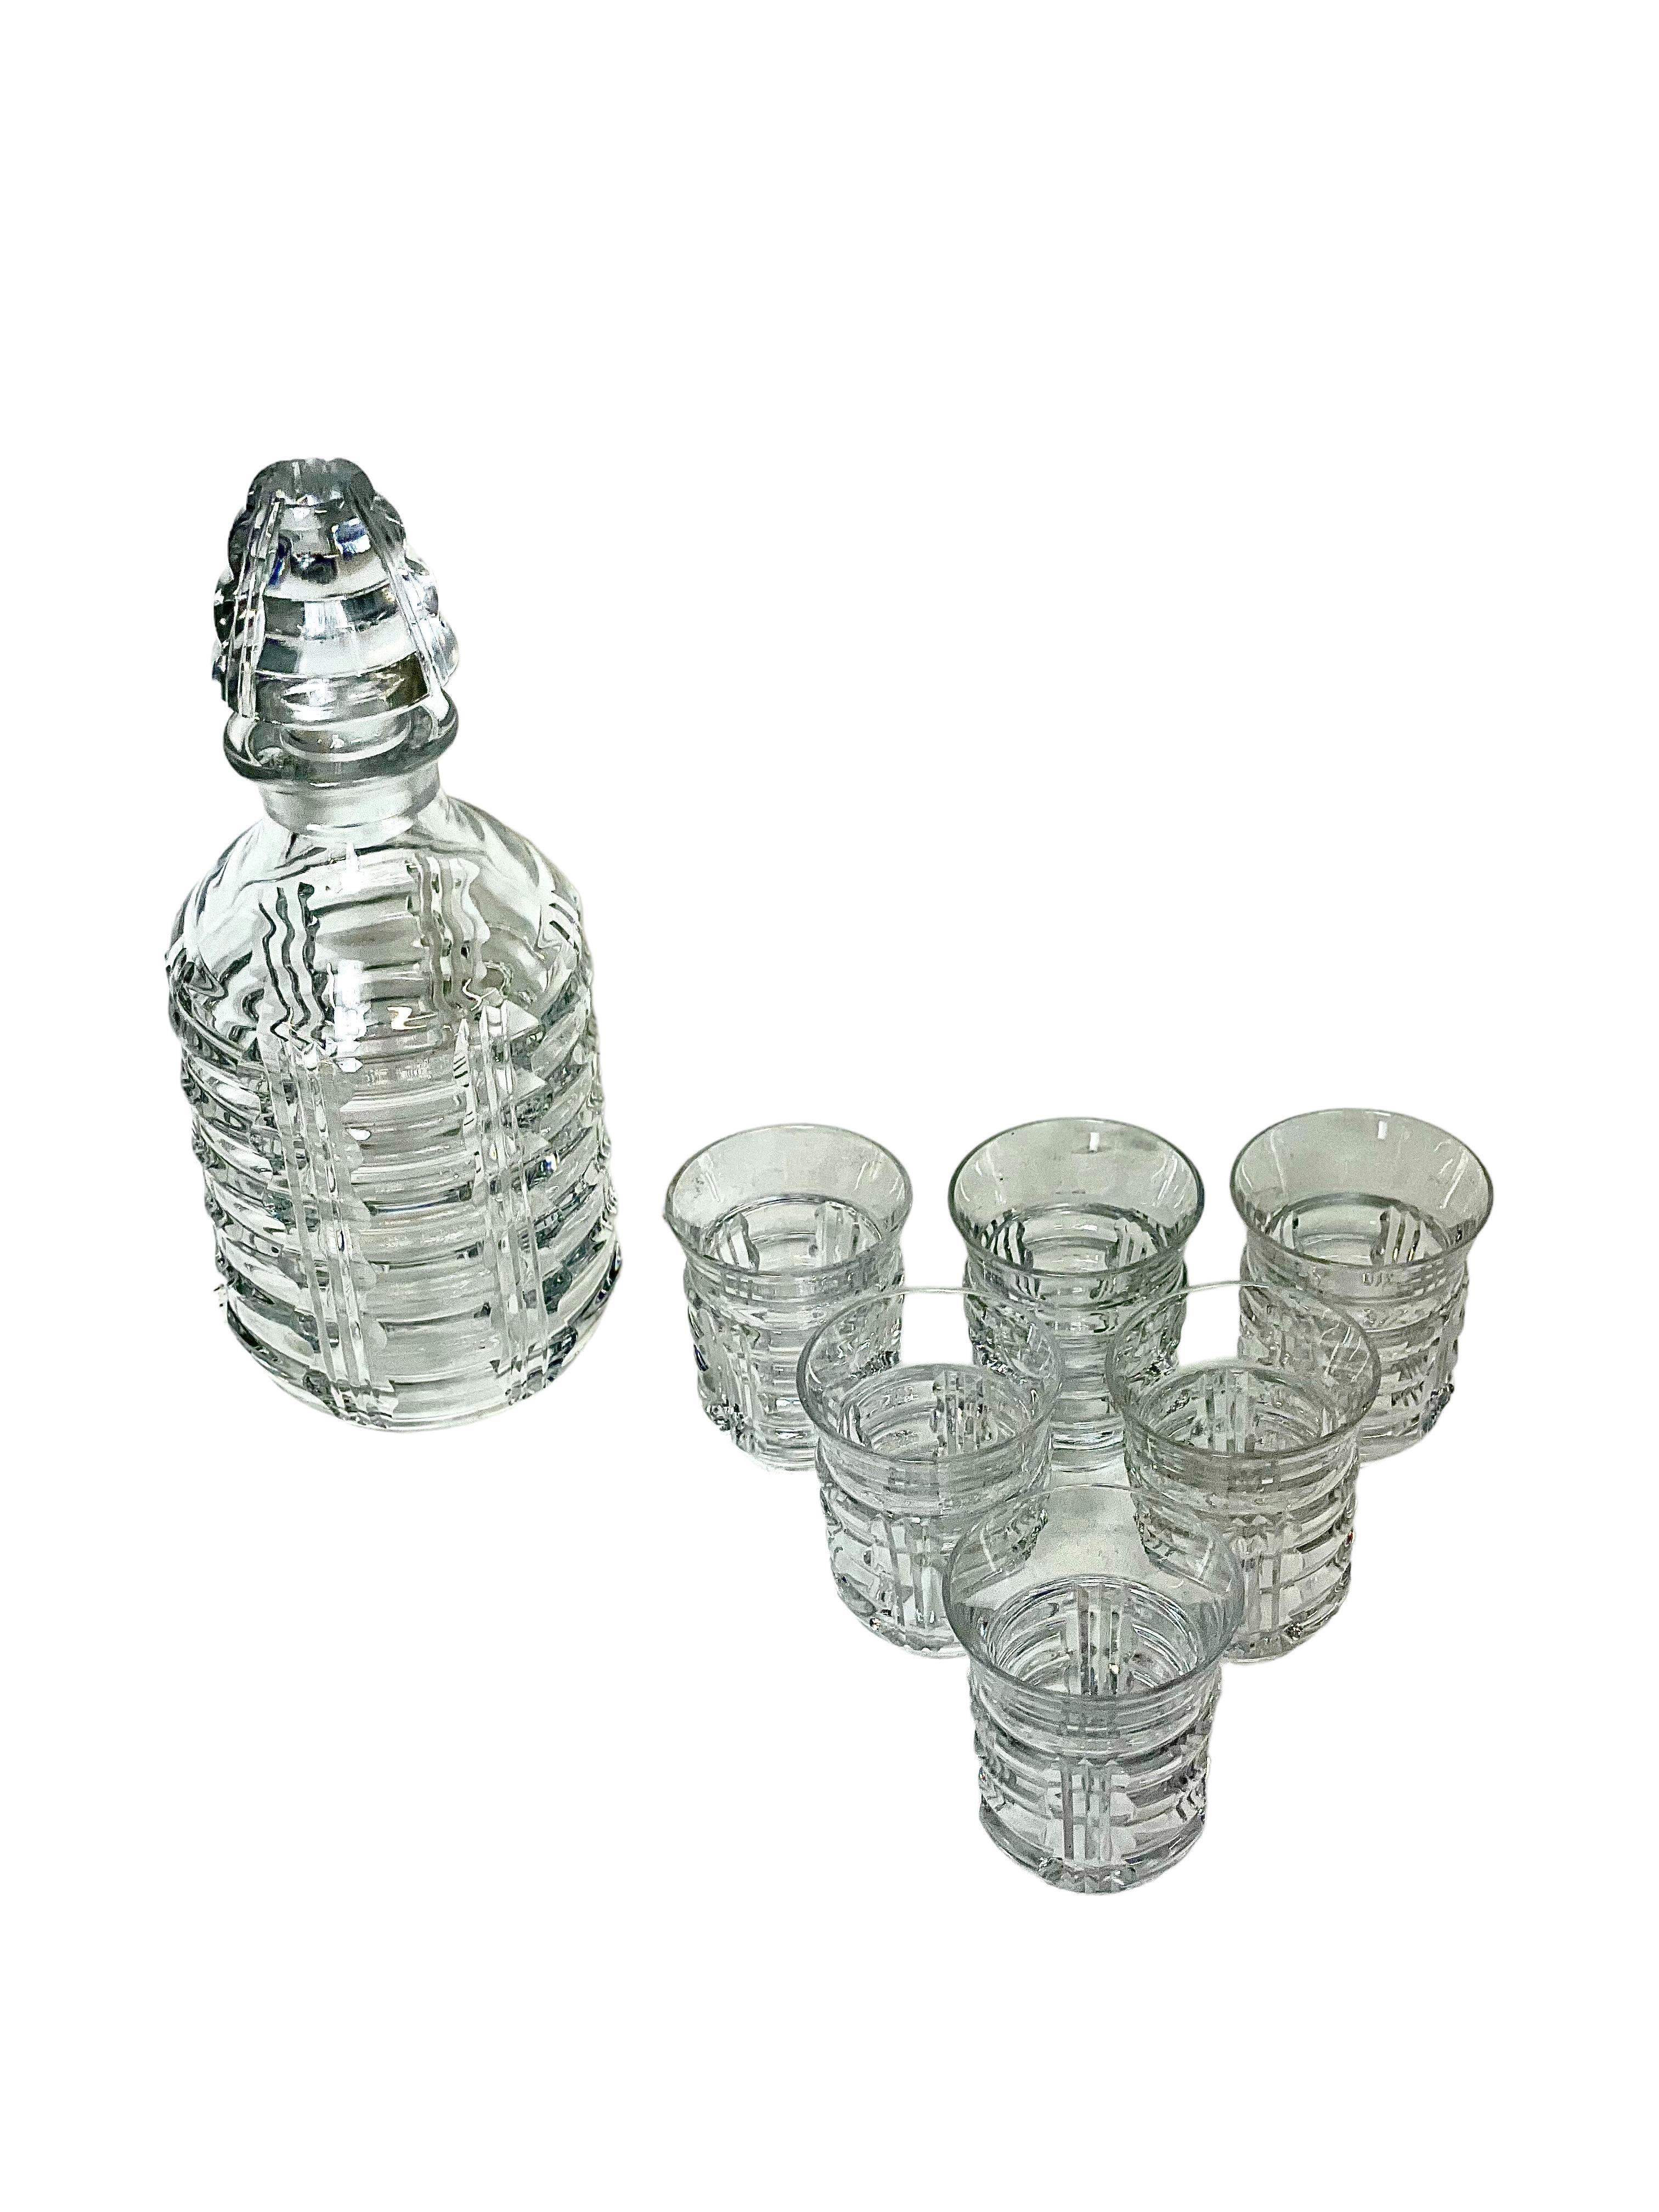 A Saint Louis crystal port decanter and six tumbler glasses, delightfully embellished with a tactile and geometric design of gently undulating waves. The bottle-shaped decanter has its original, tightly-fitting and multi-faceted ball stopper, and is